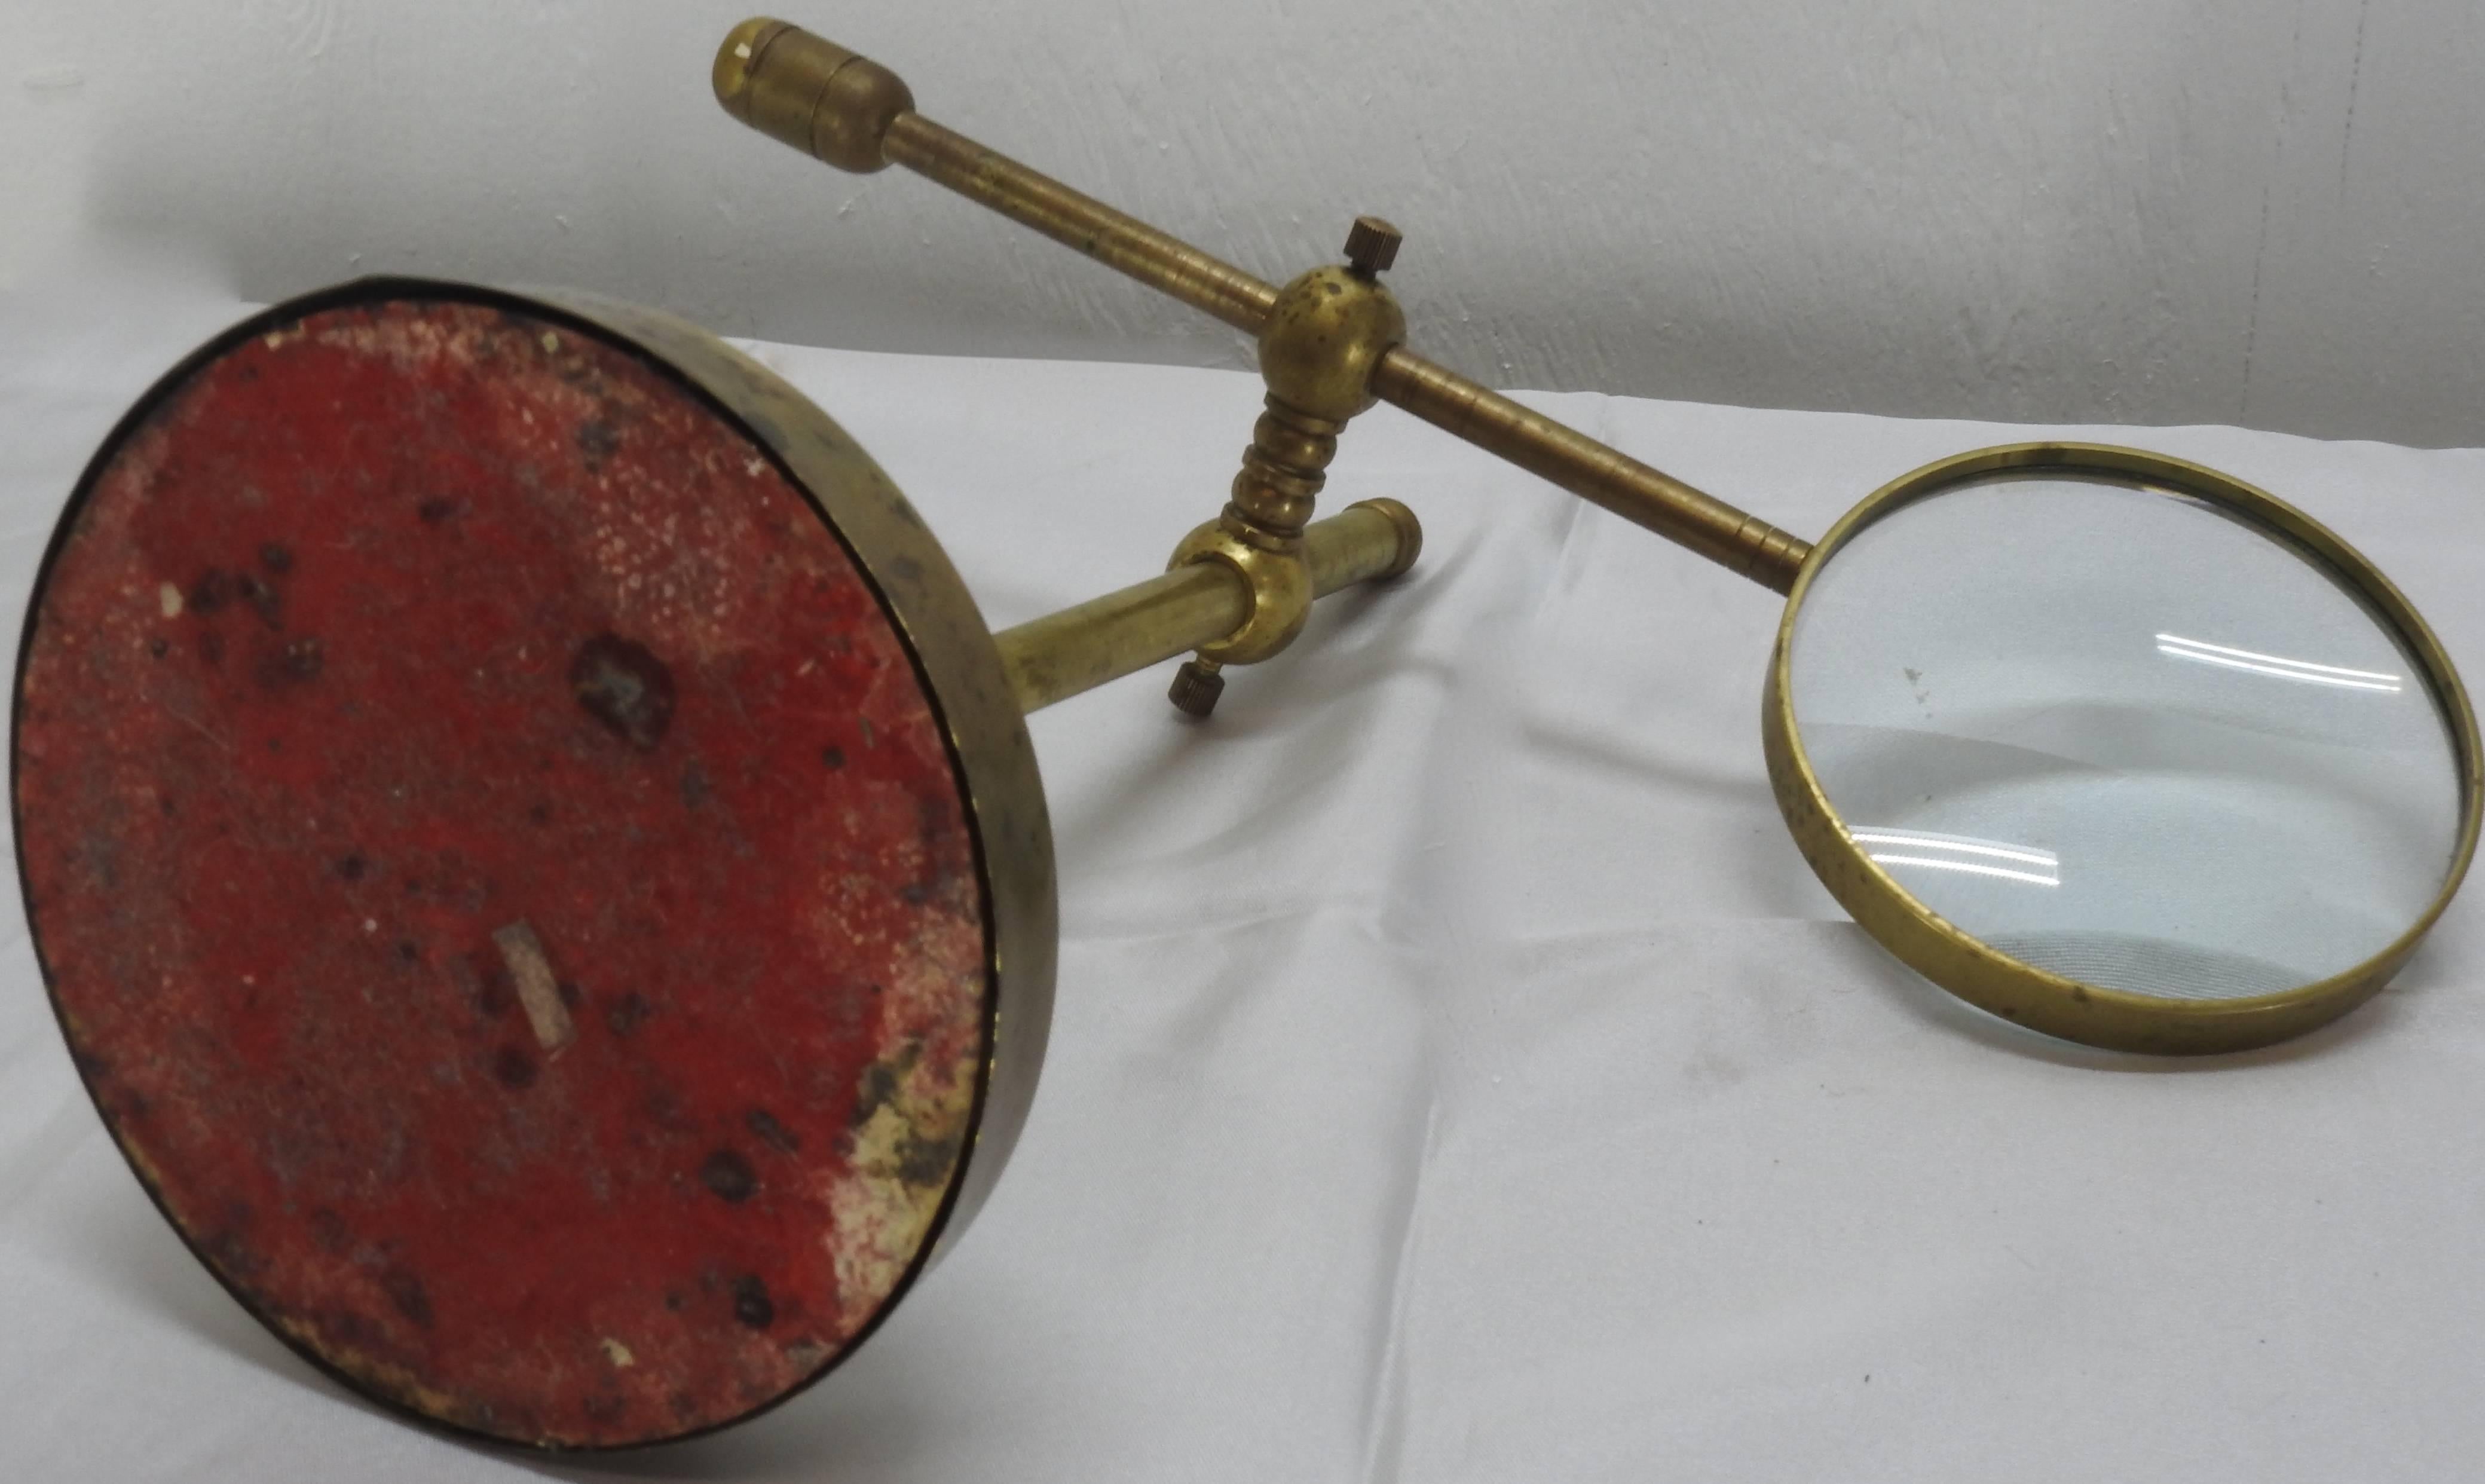 20th Century Industrial Magnifier on Stand Solid Brass